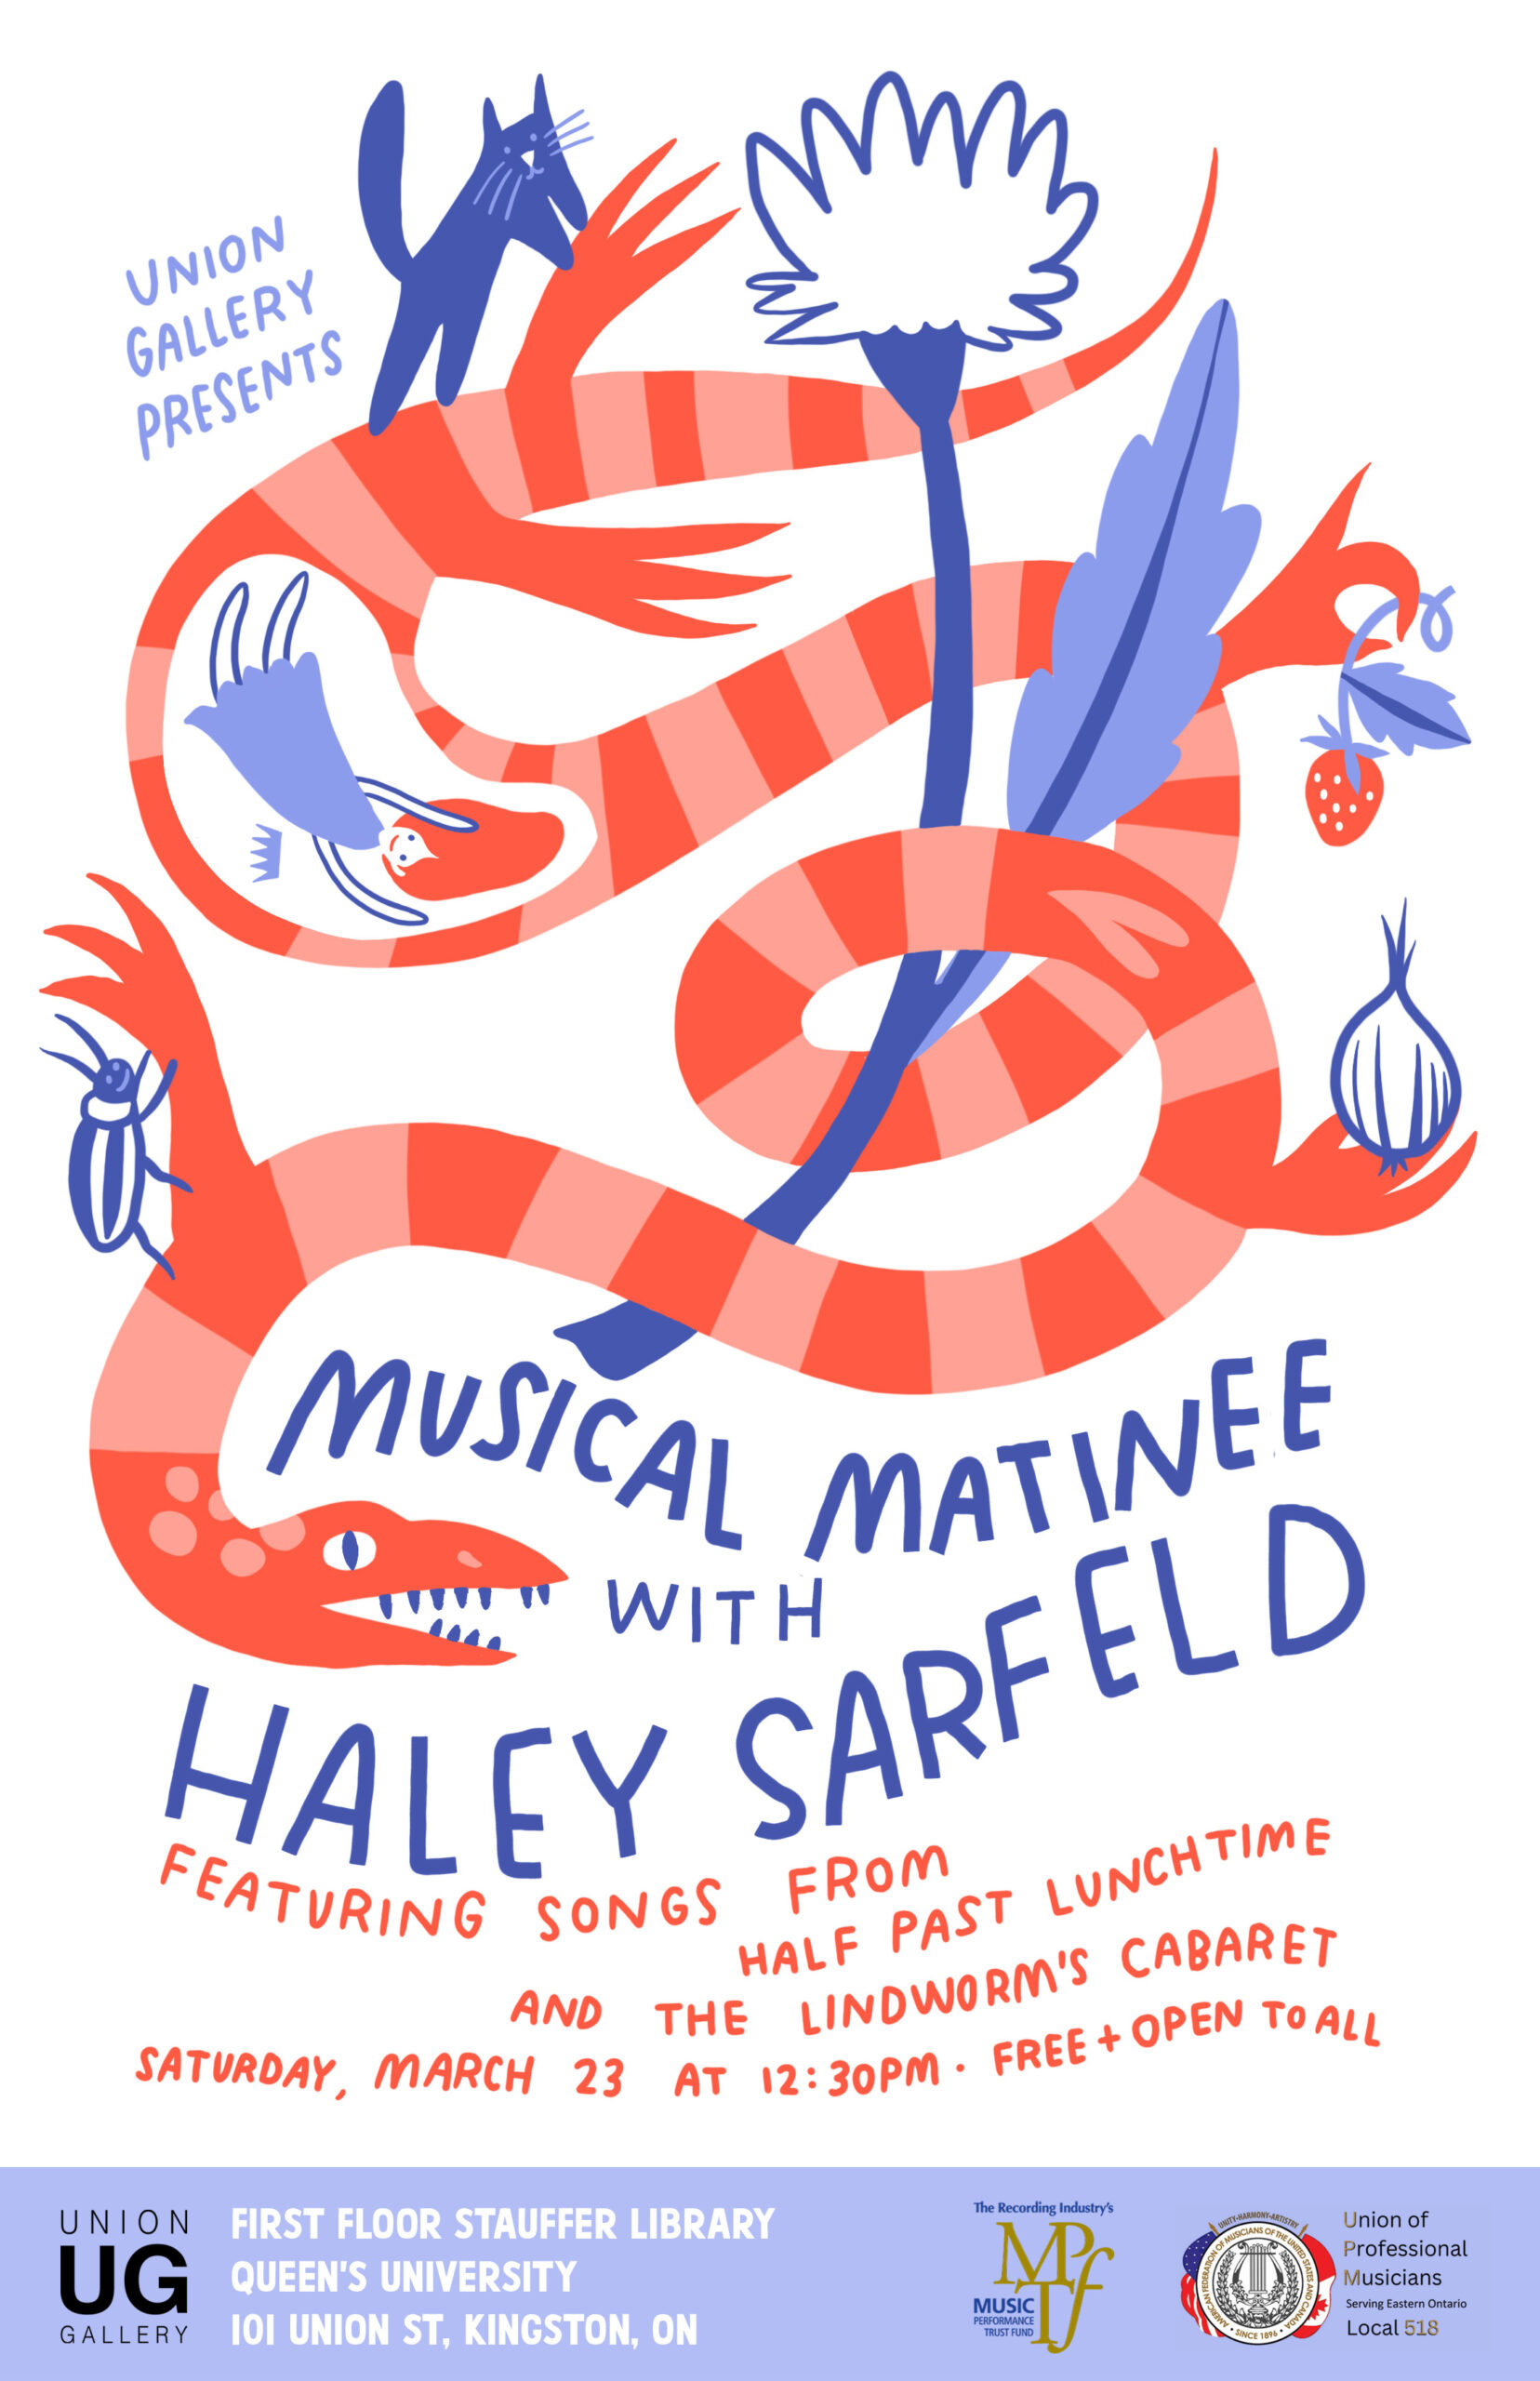 Poster for 'Musical Matinee with Haley Sarfeld'. Location, date, time, presenter, and featured songs are noted.